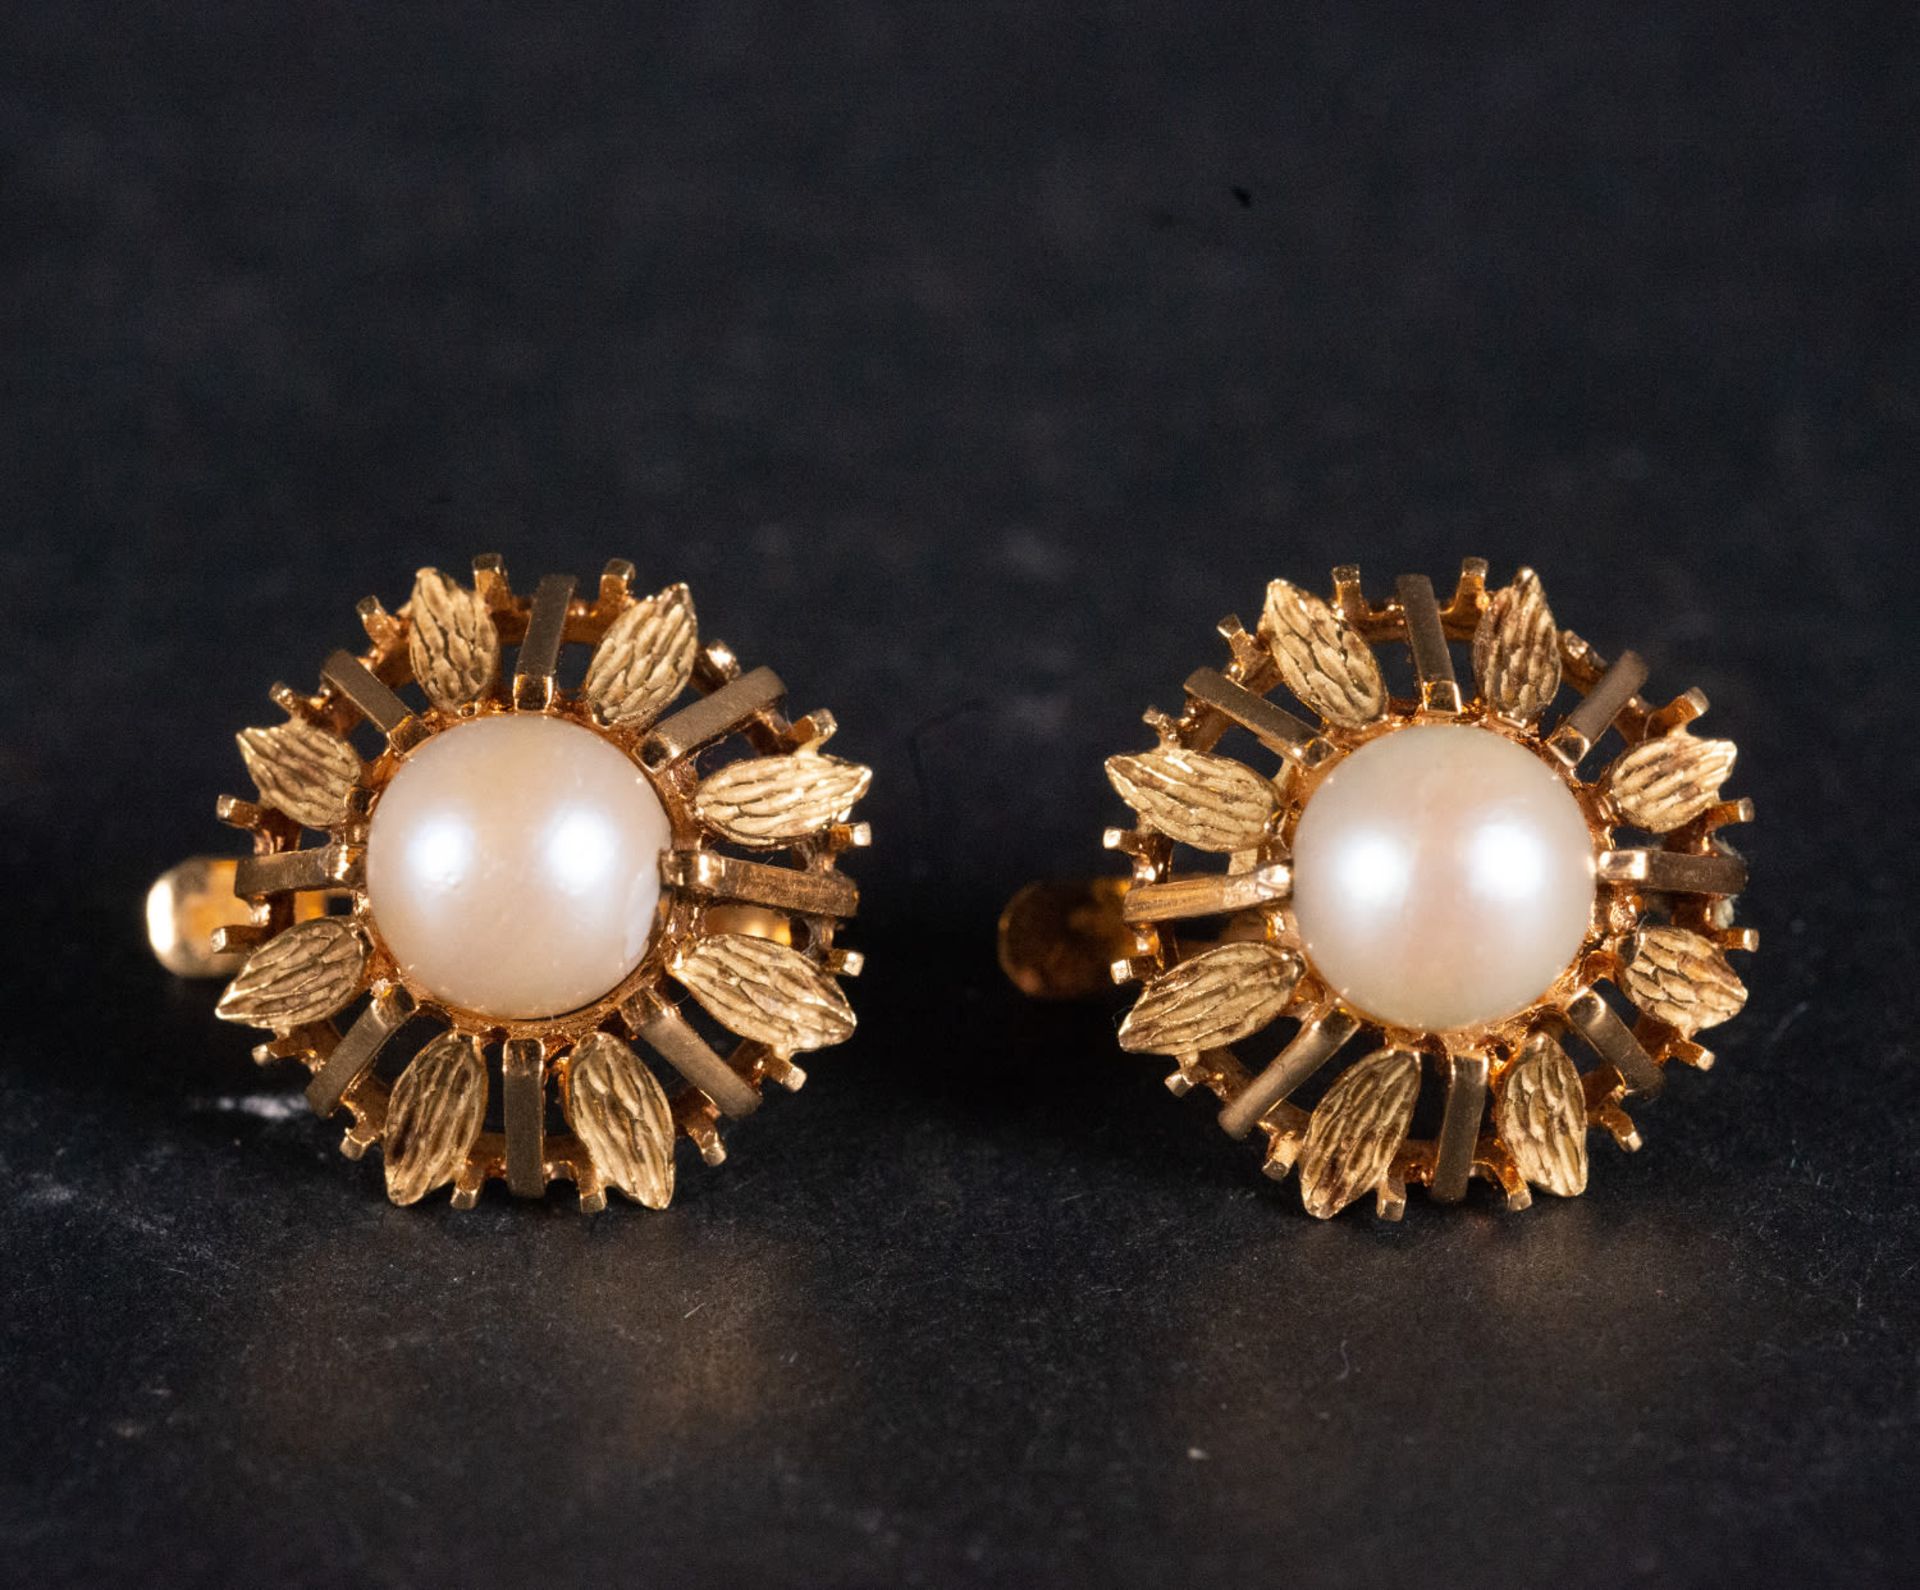 Gold and pearl earrings from the beginning of the 20th century - Image 3 of 4